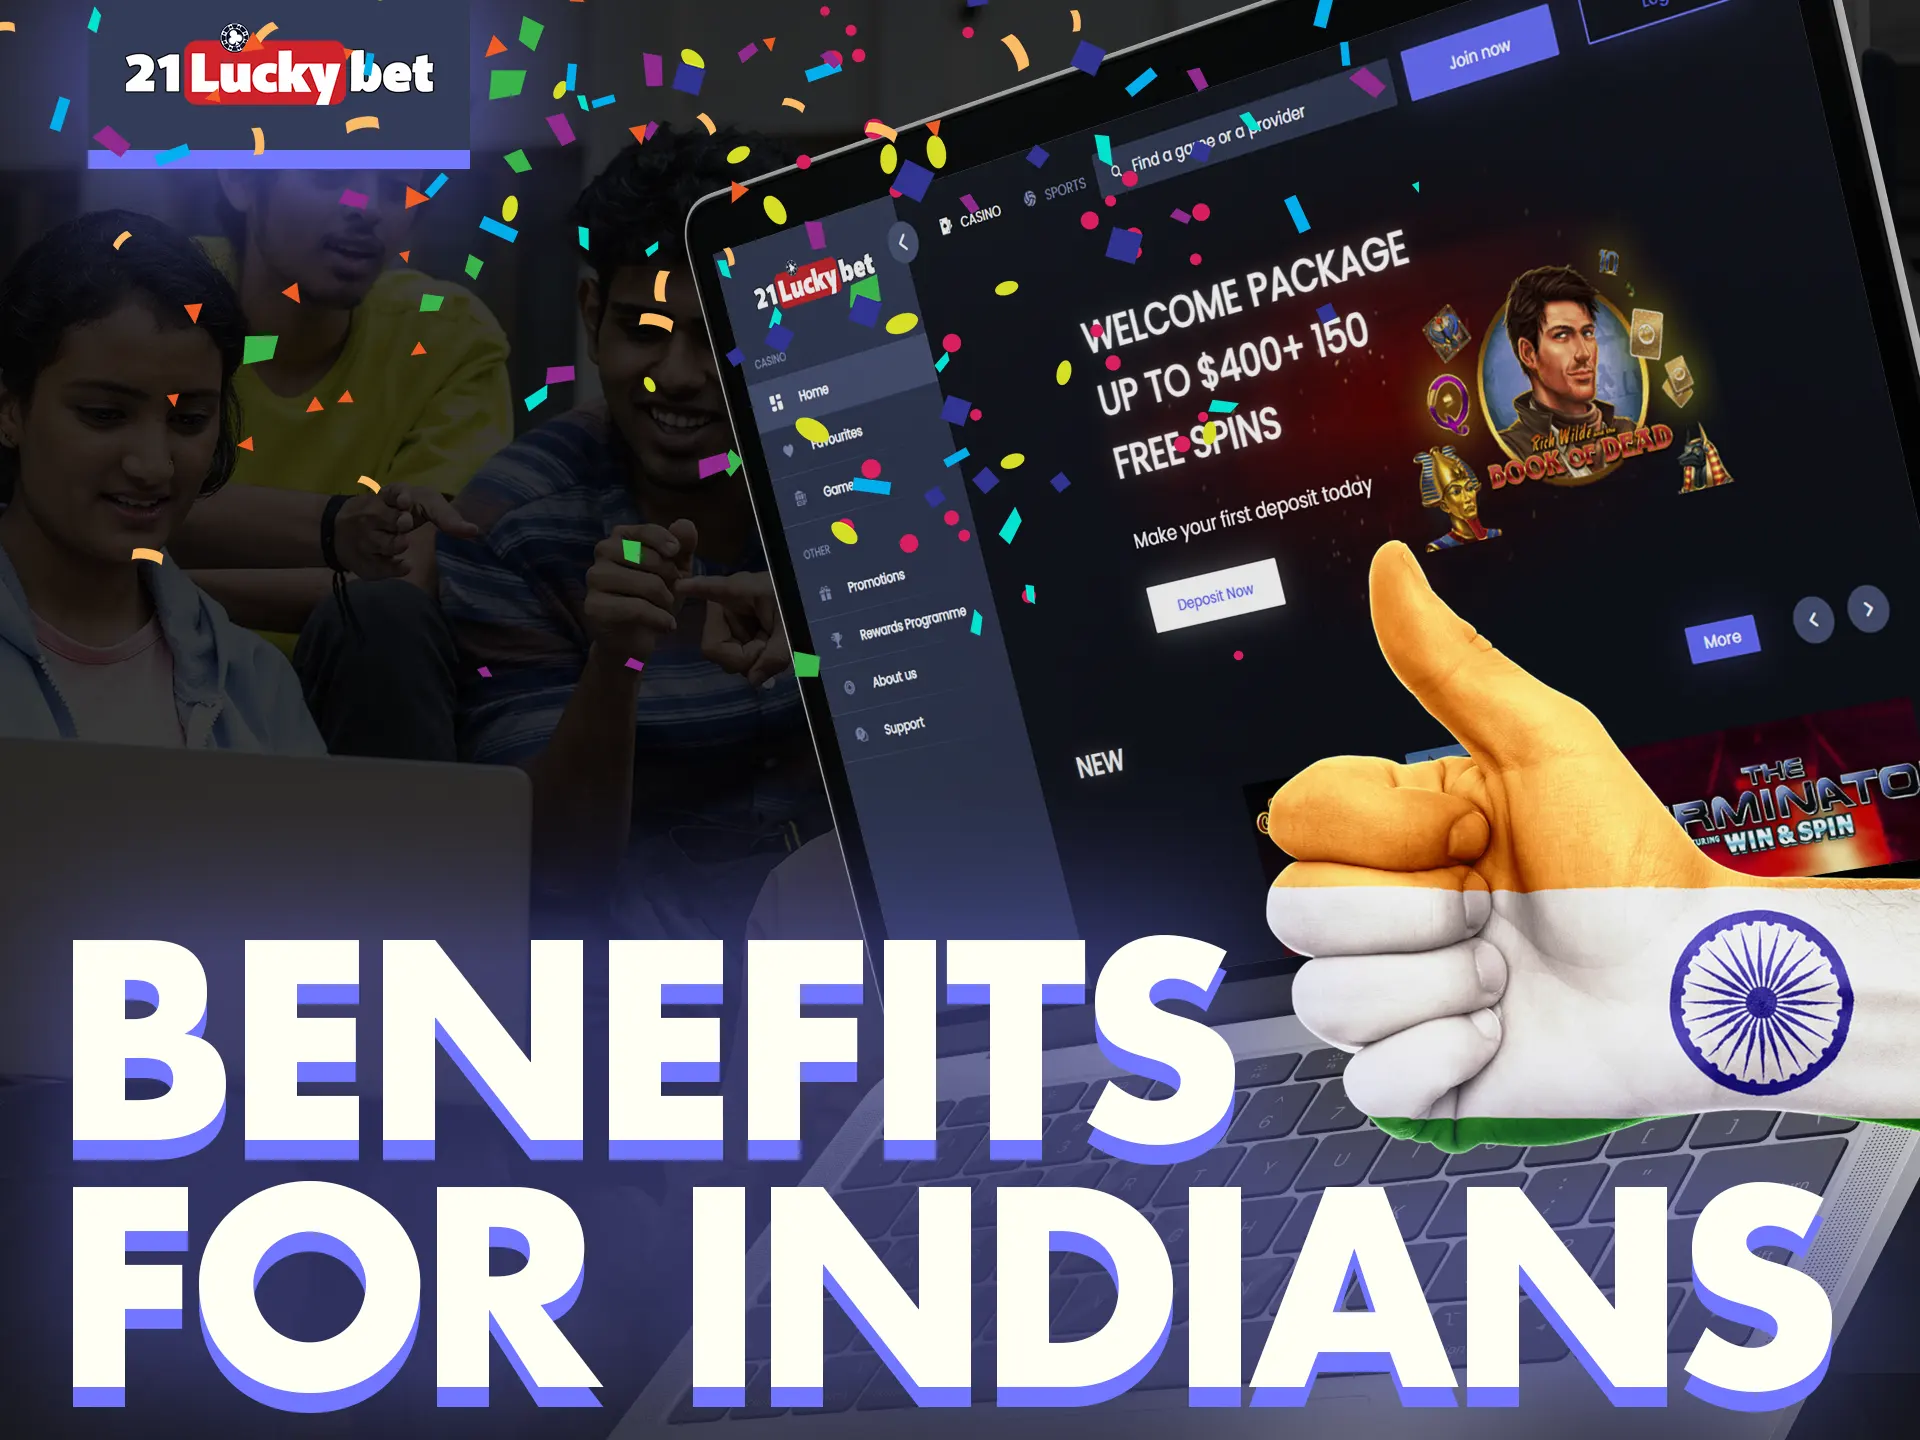 At 21luckybet you will find many benefits for players.